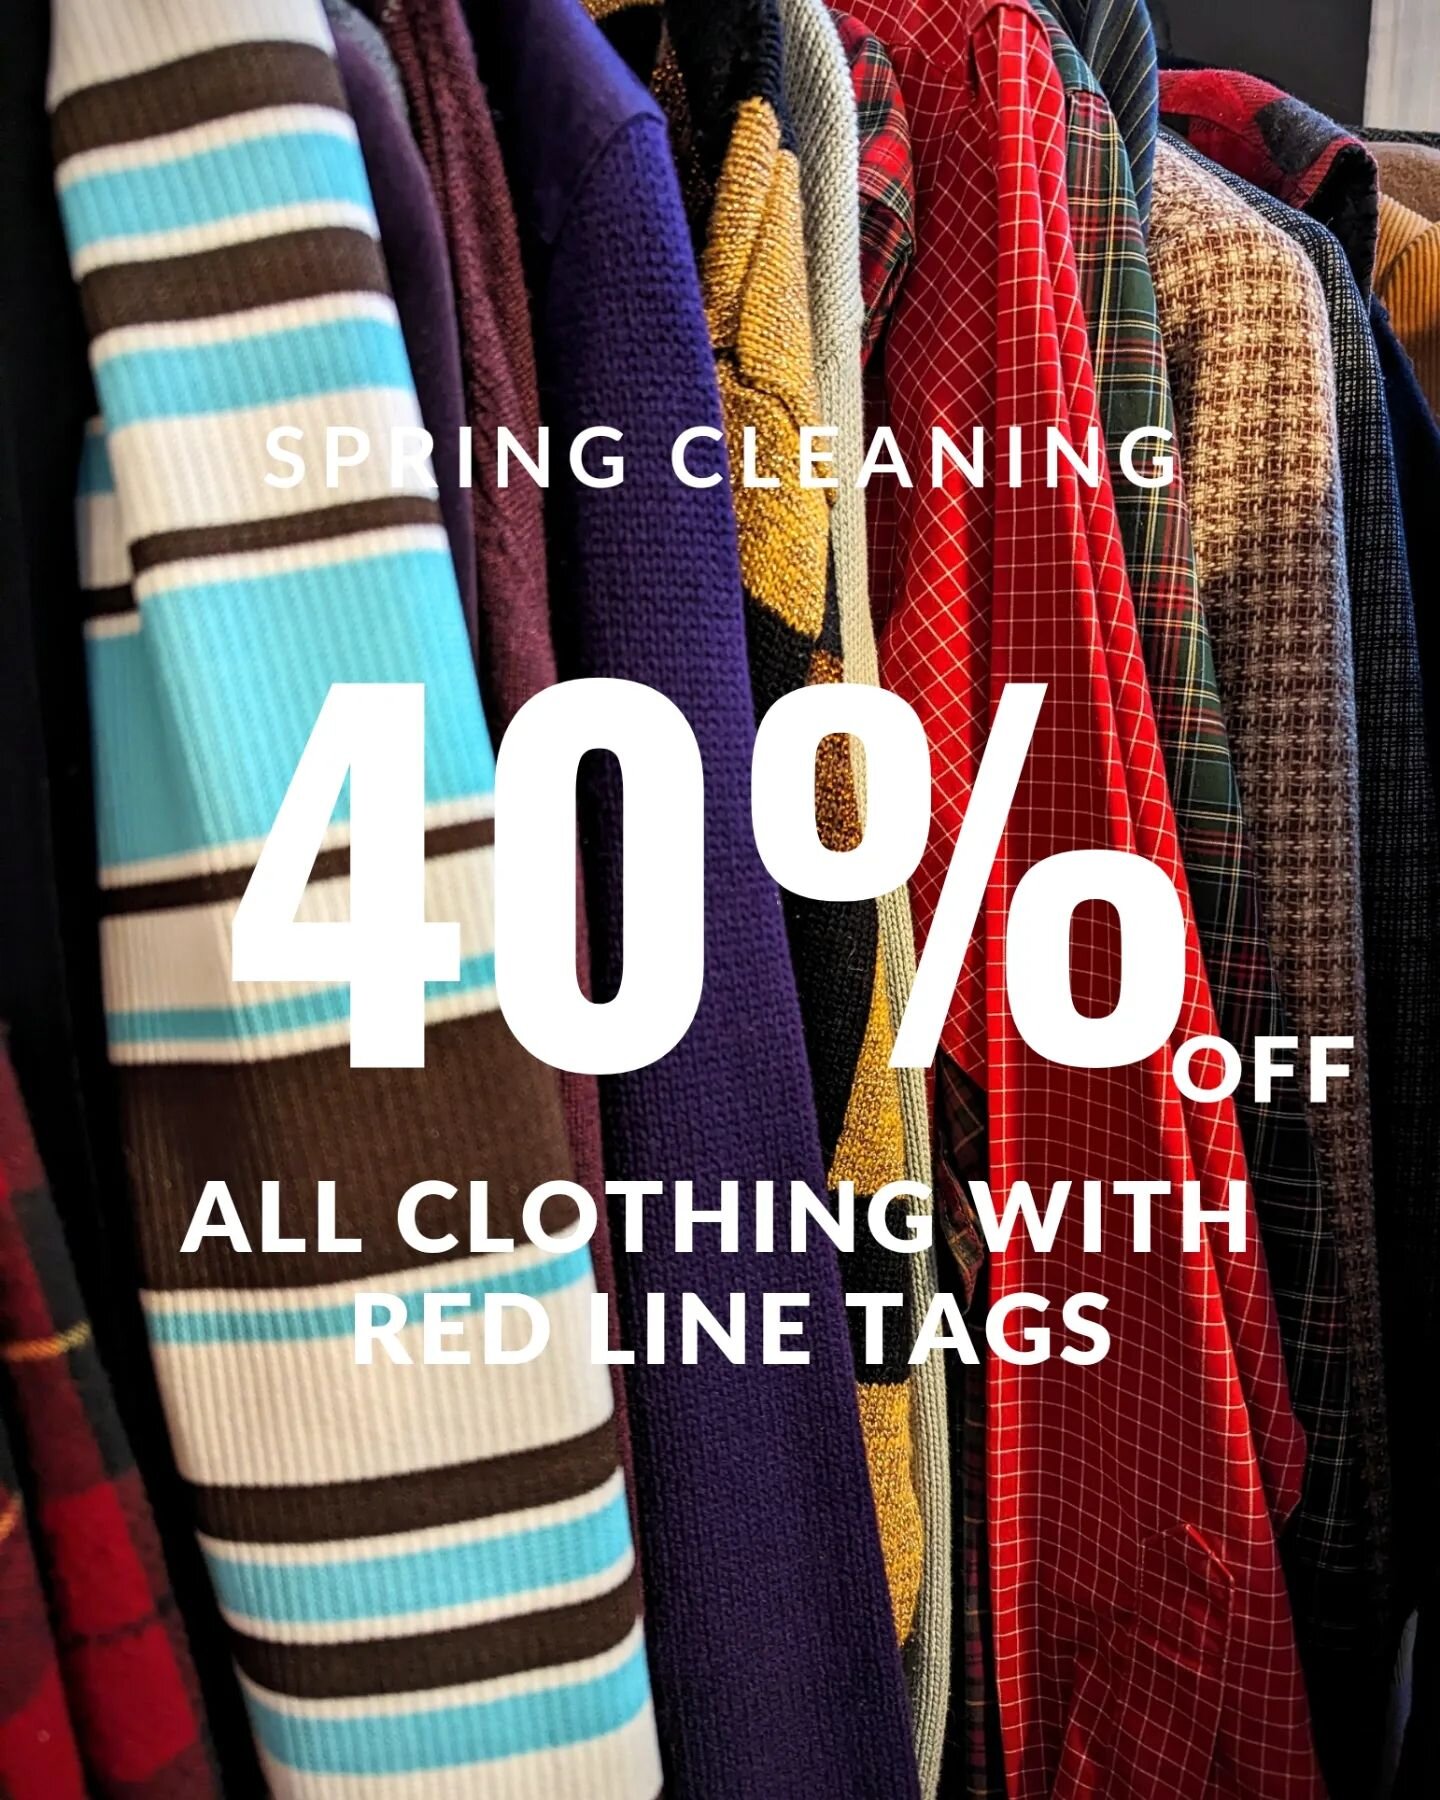 It's the time of year that we start dreaming about lighter layers, so that means it's time to make some room! All clothing with a red line through the tag is 40% off starting today! 
I went a little crazy and 3 of the 4 racks we have are all slashed!